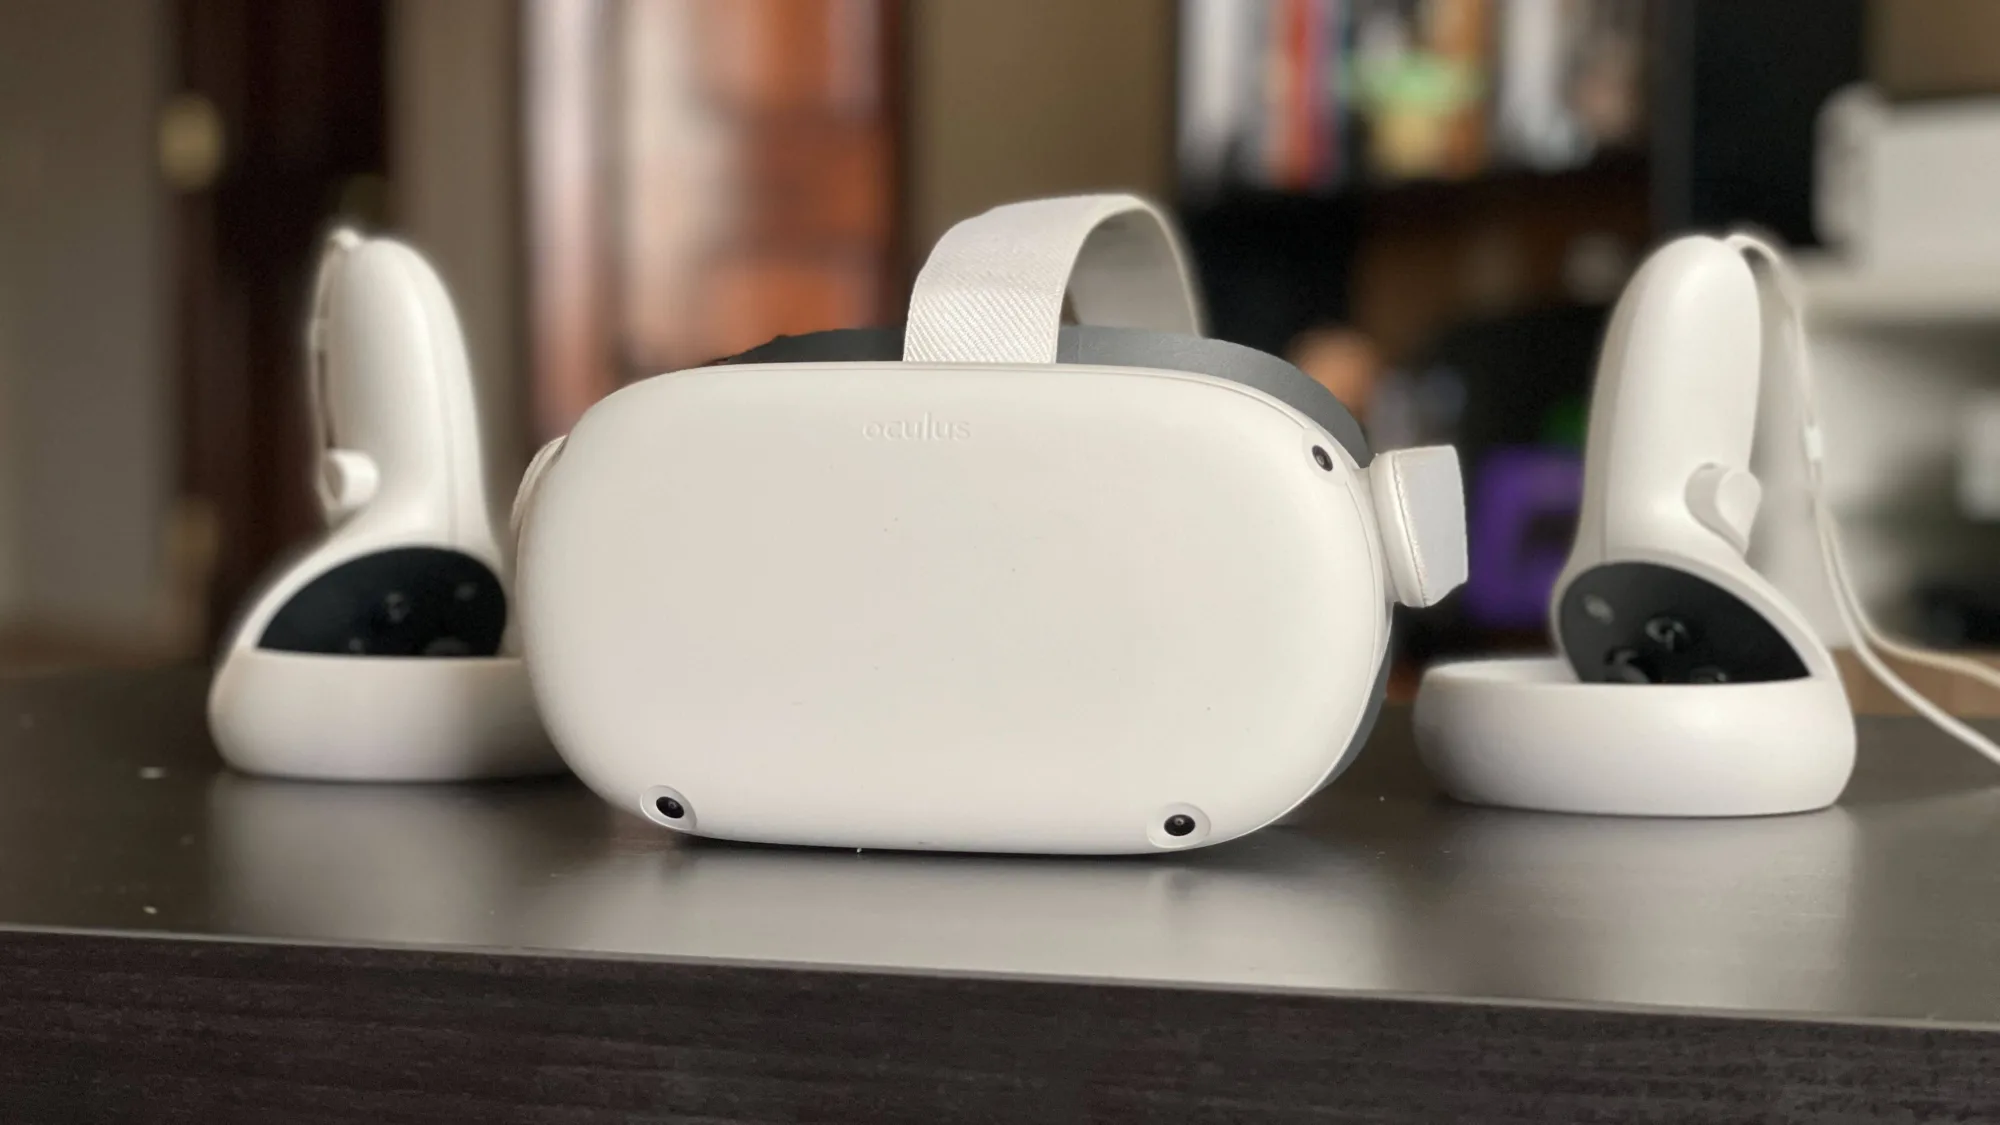 Can I Charge My Oculus Quest 2 Overnight? 1